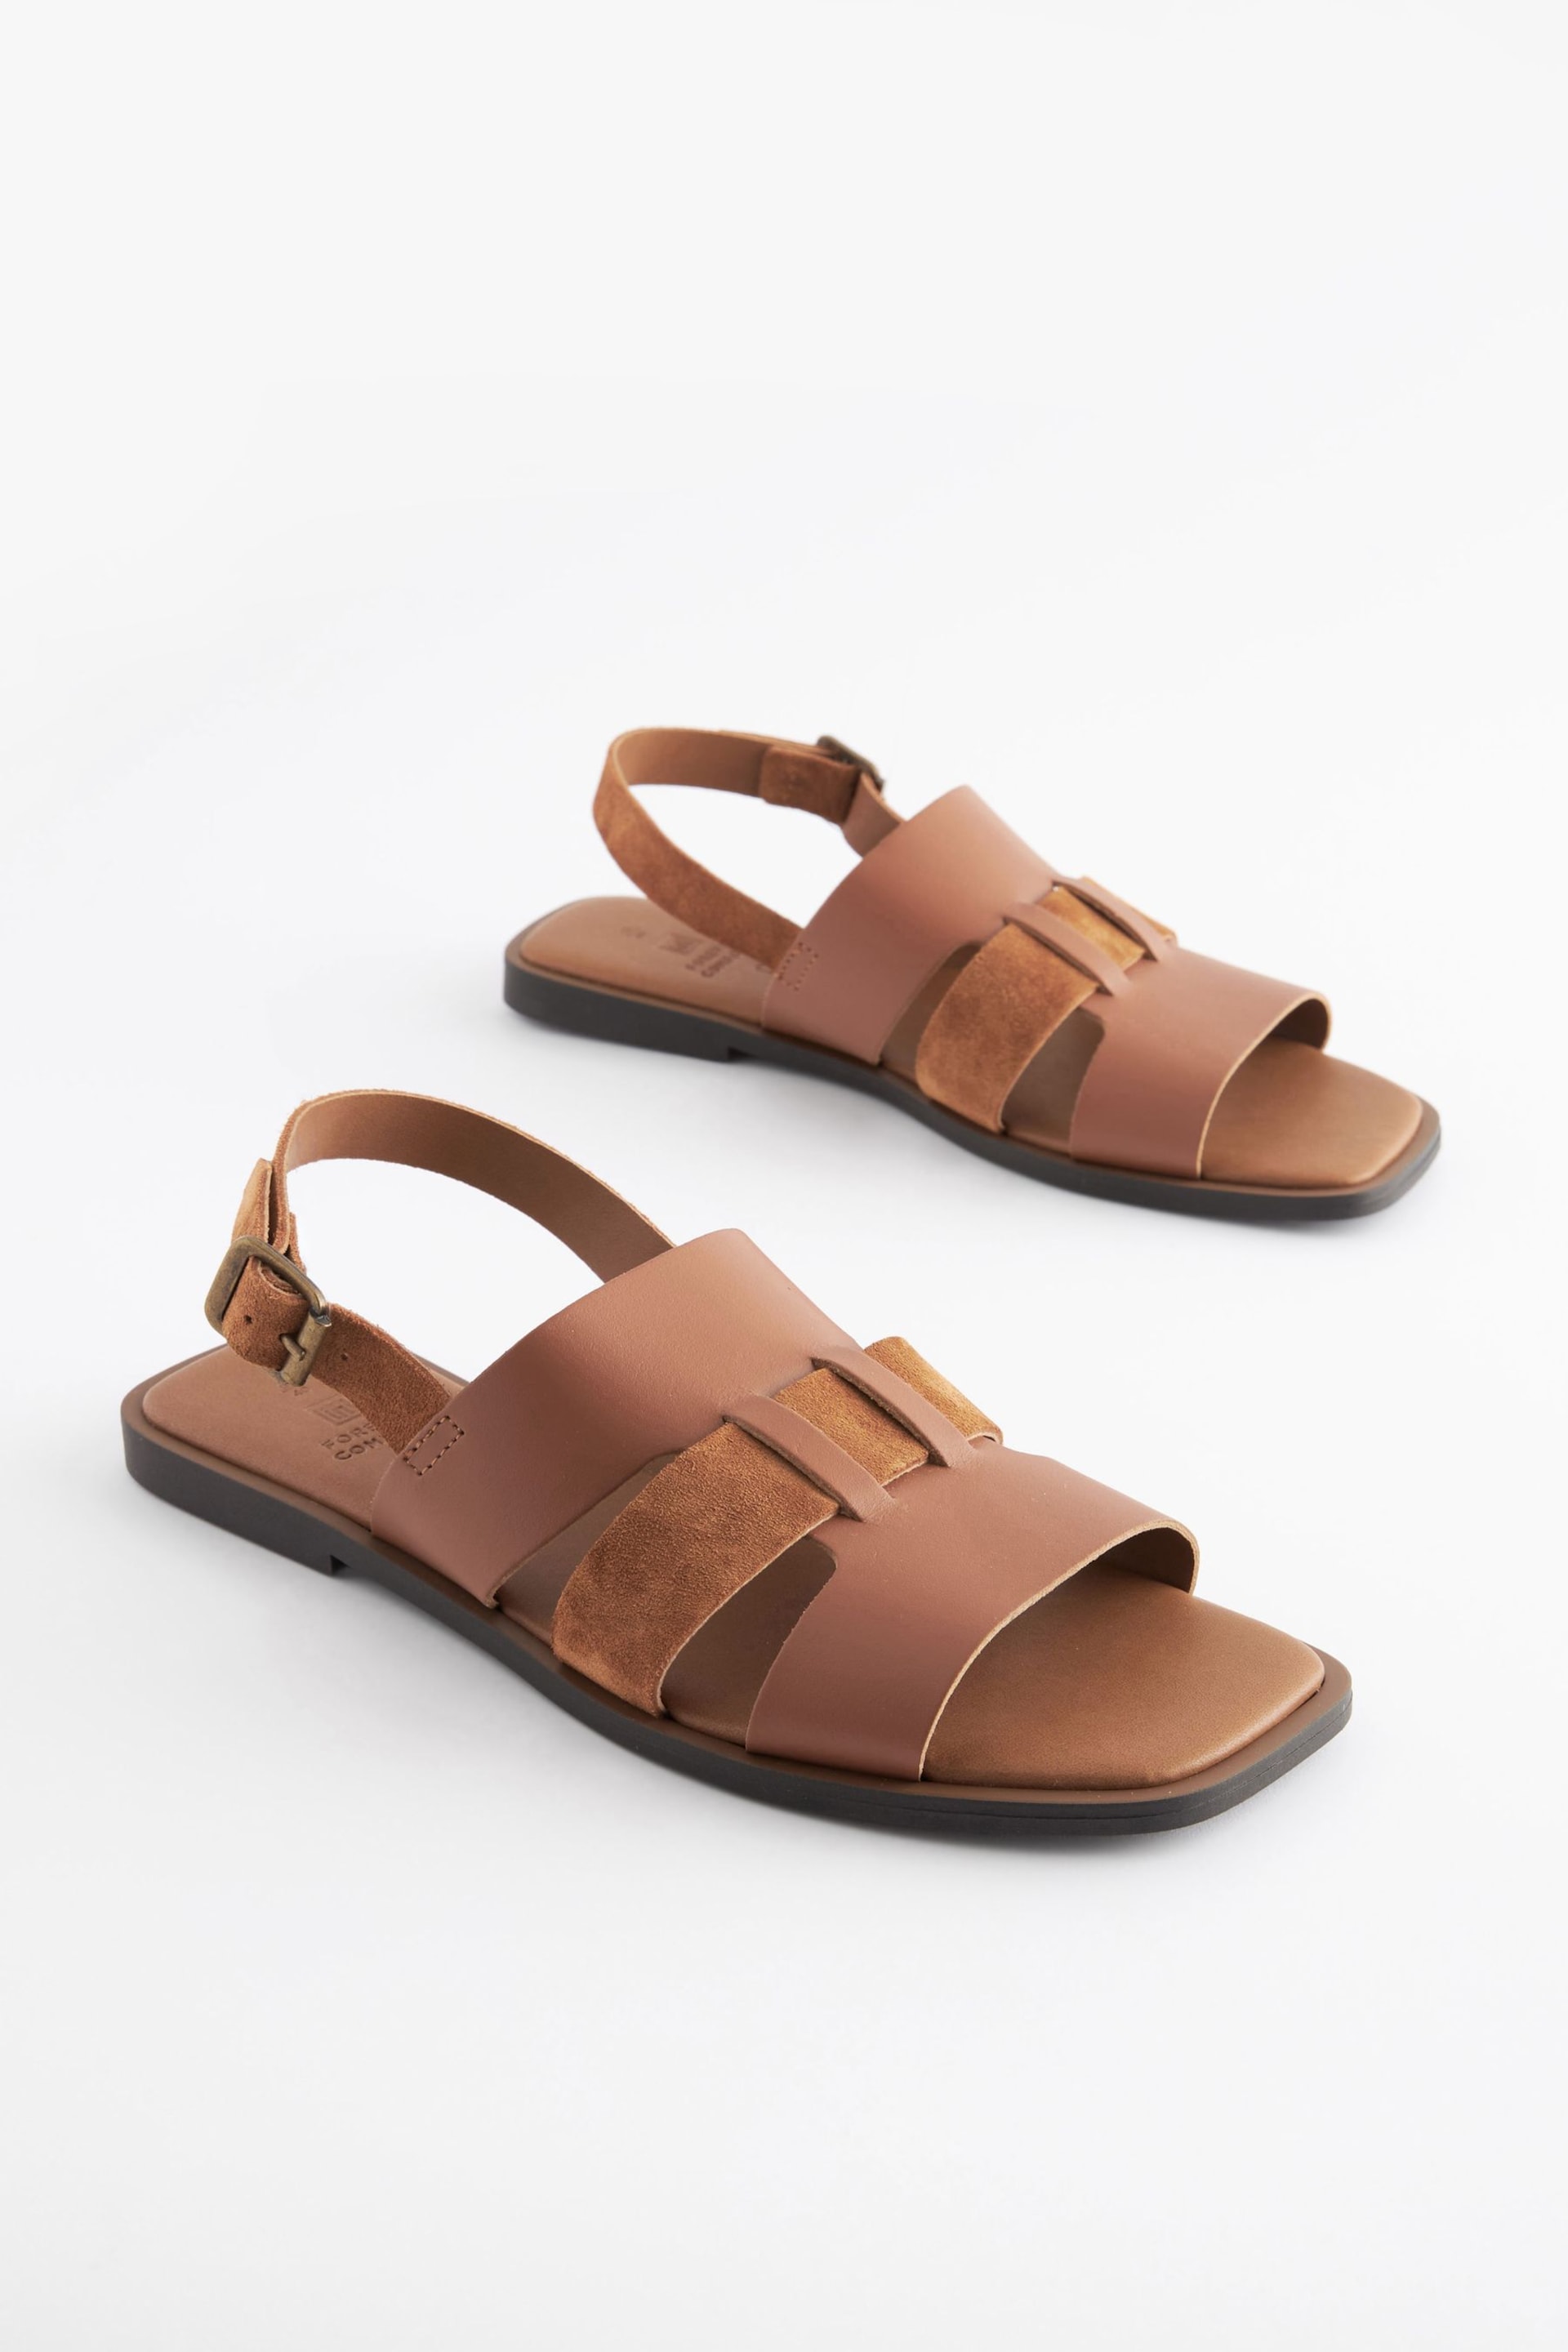 Tan Brown Extra Wide Fit Forever Comfort® Leather Slingback Sandals - Image 1 of 5